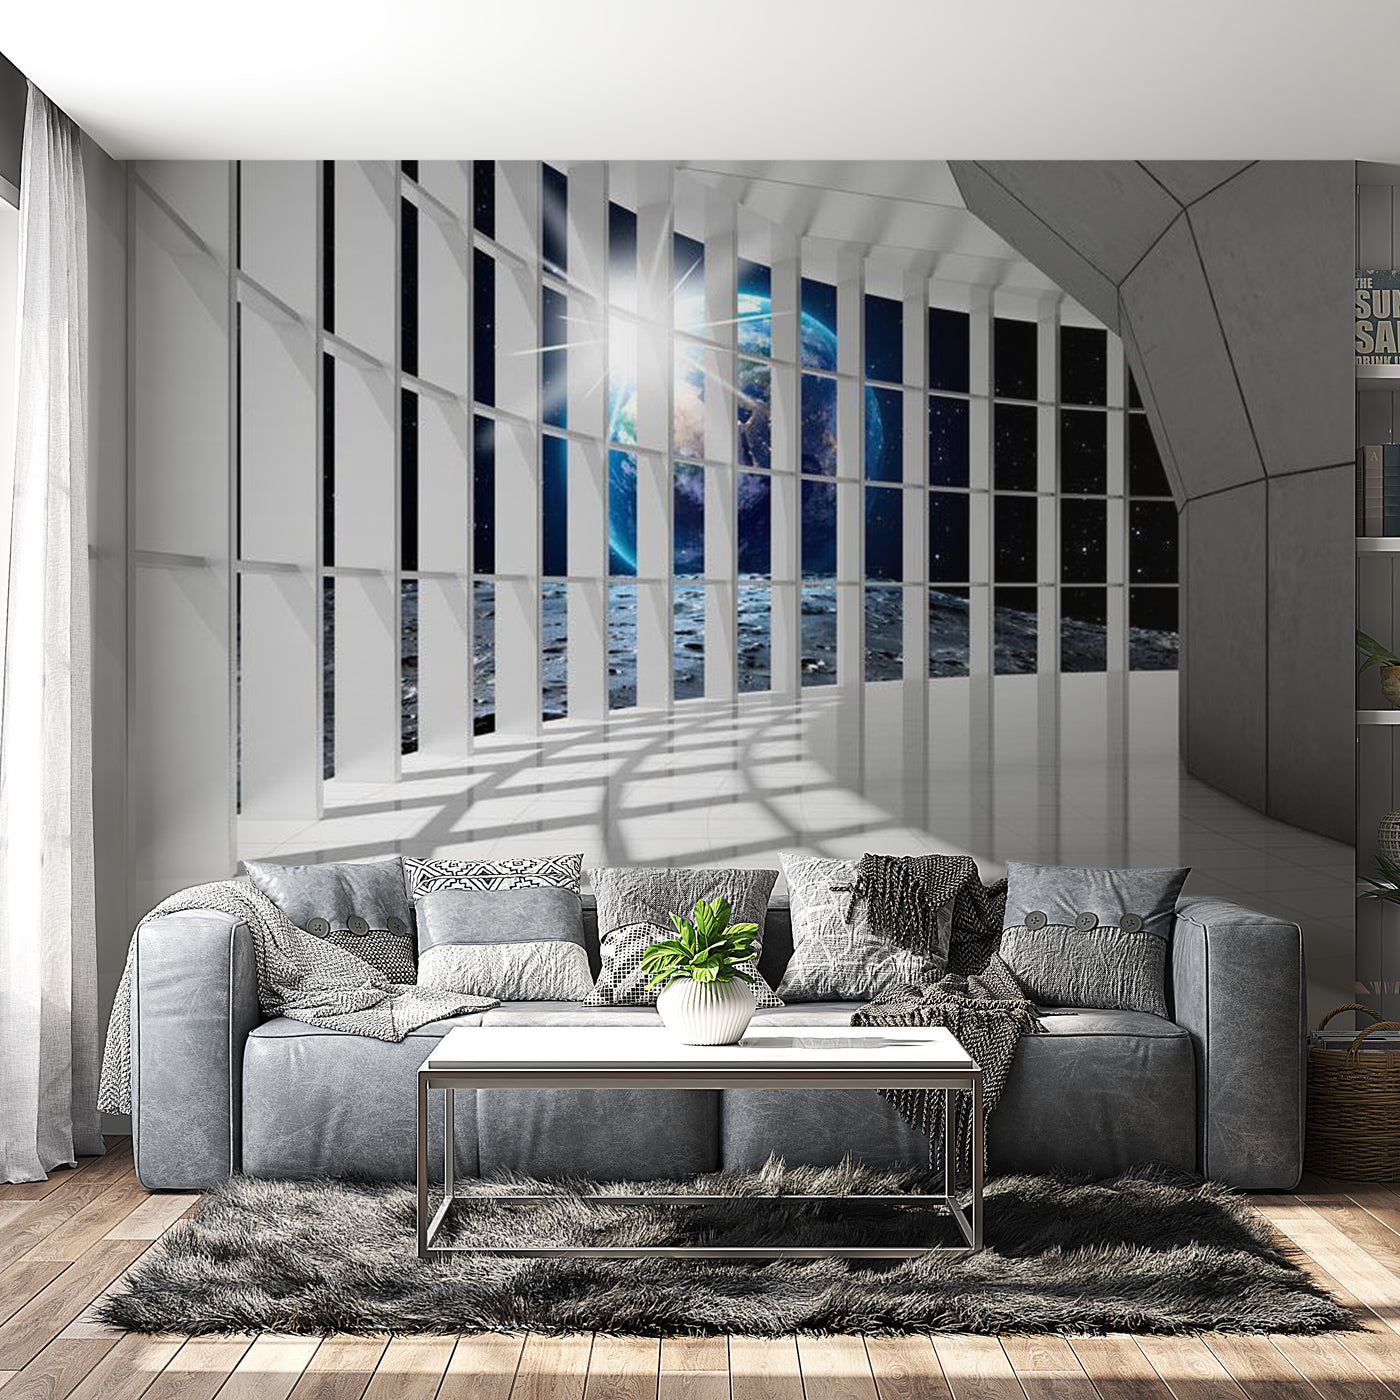 Peel & Stick 3D Illusion Wall Mural - Unearthly View - Removable Wall Decals